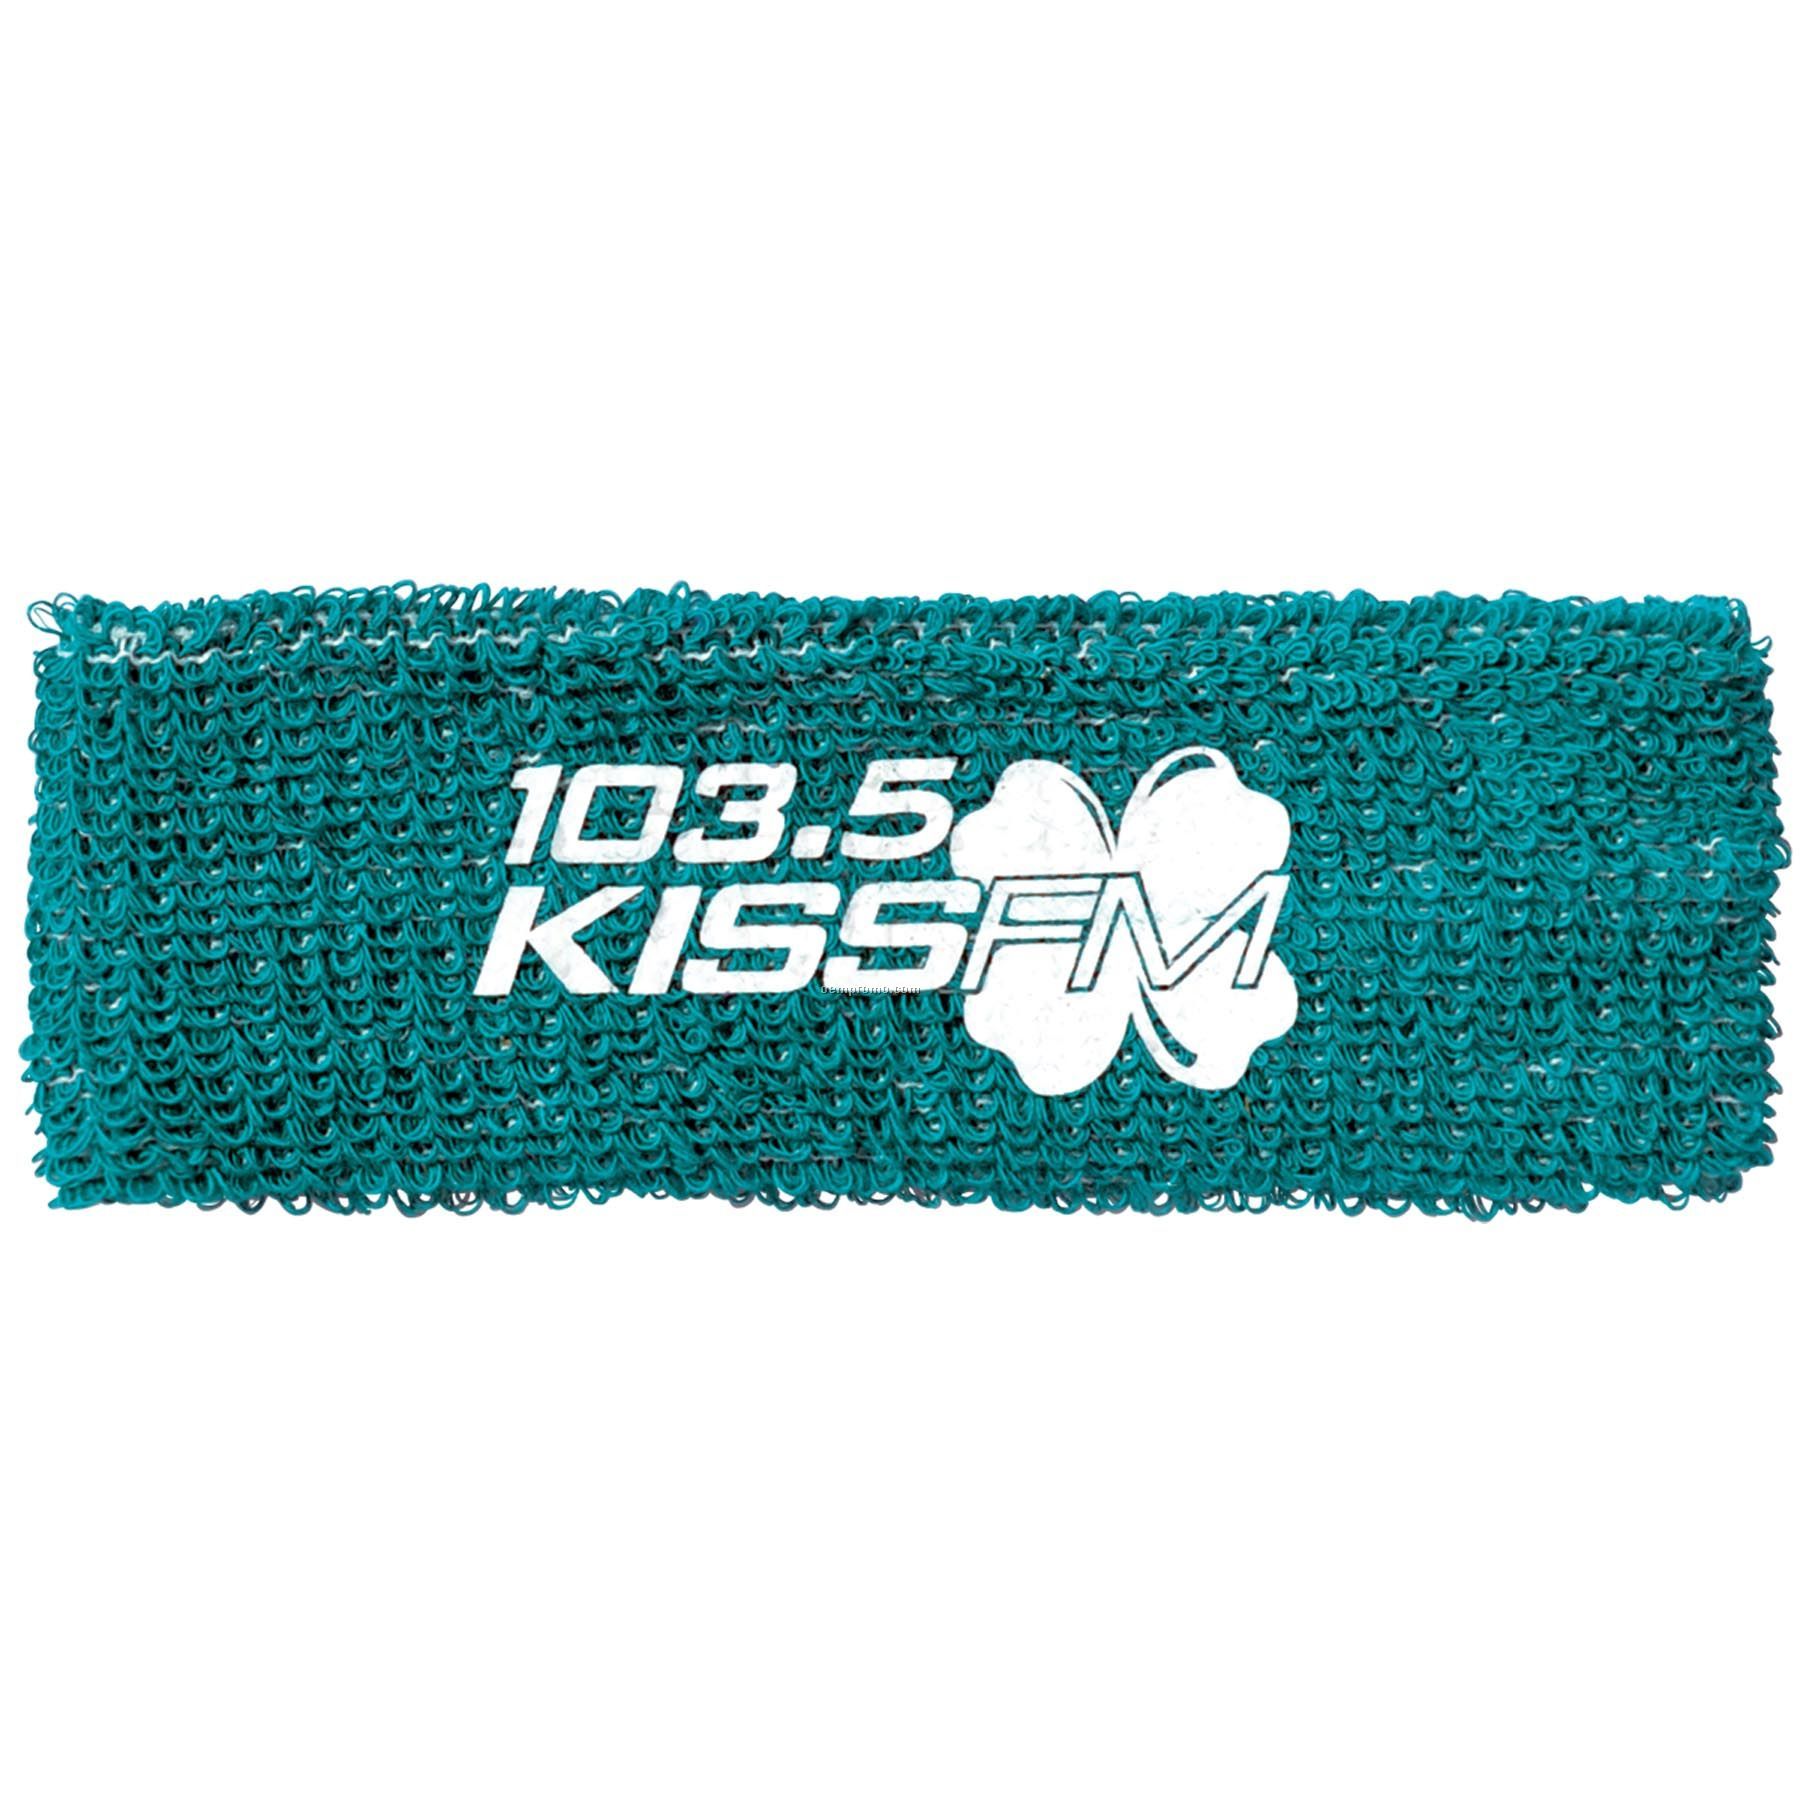 2" High Promotional-grade Loose Knit Headband With Heat Transfer